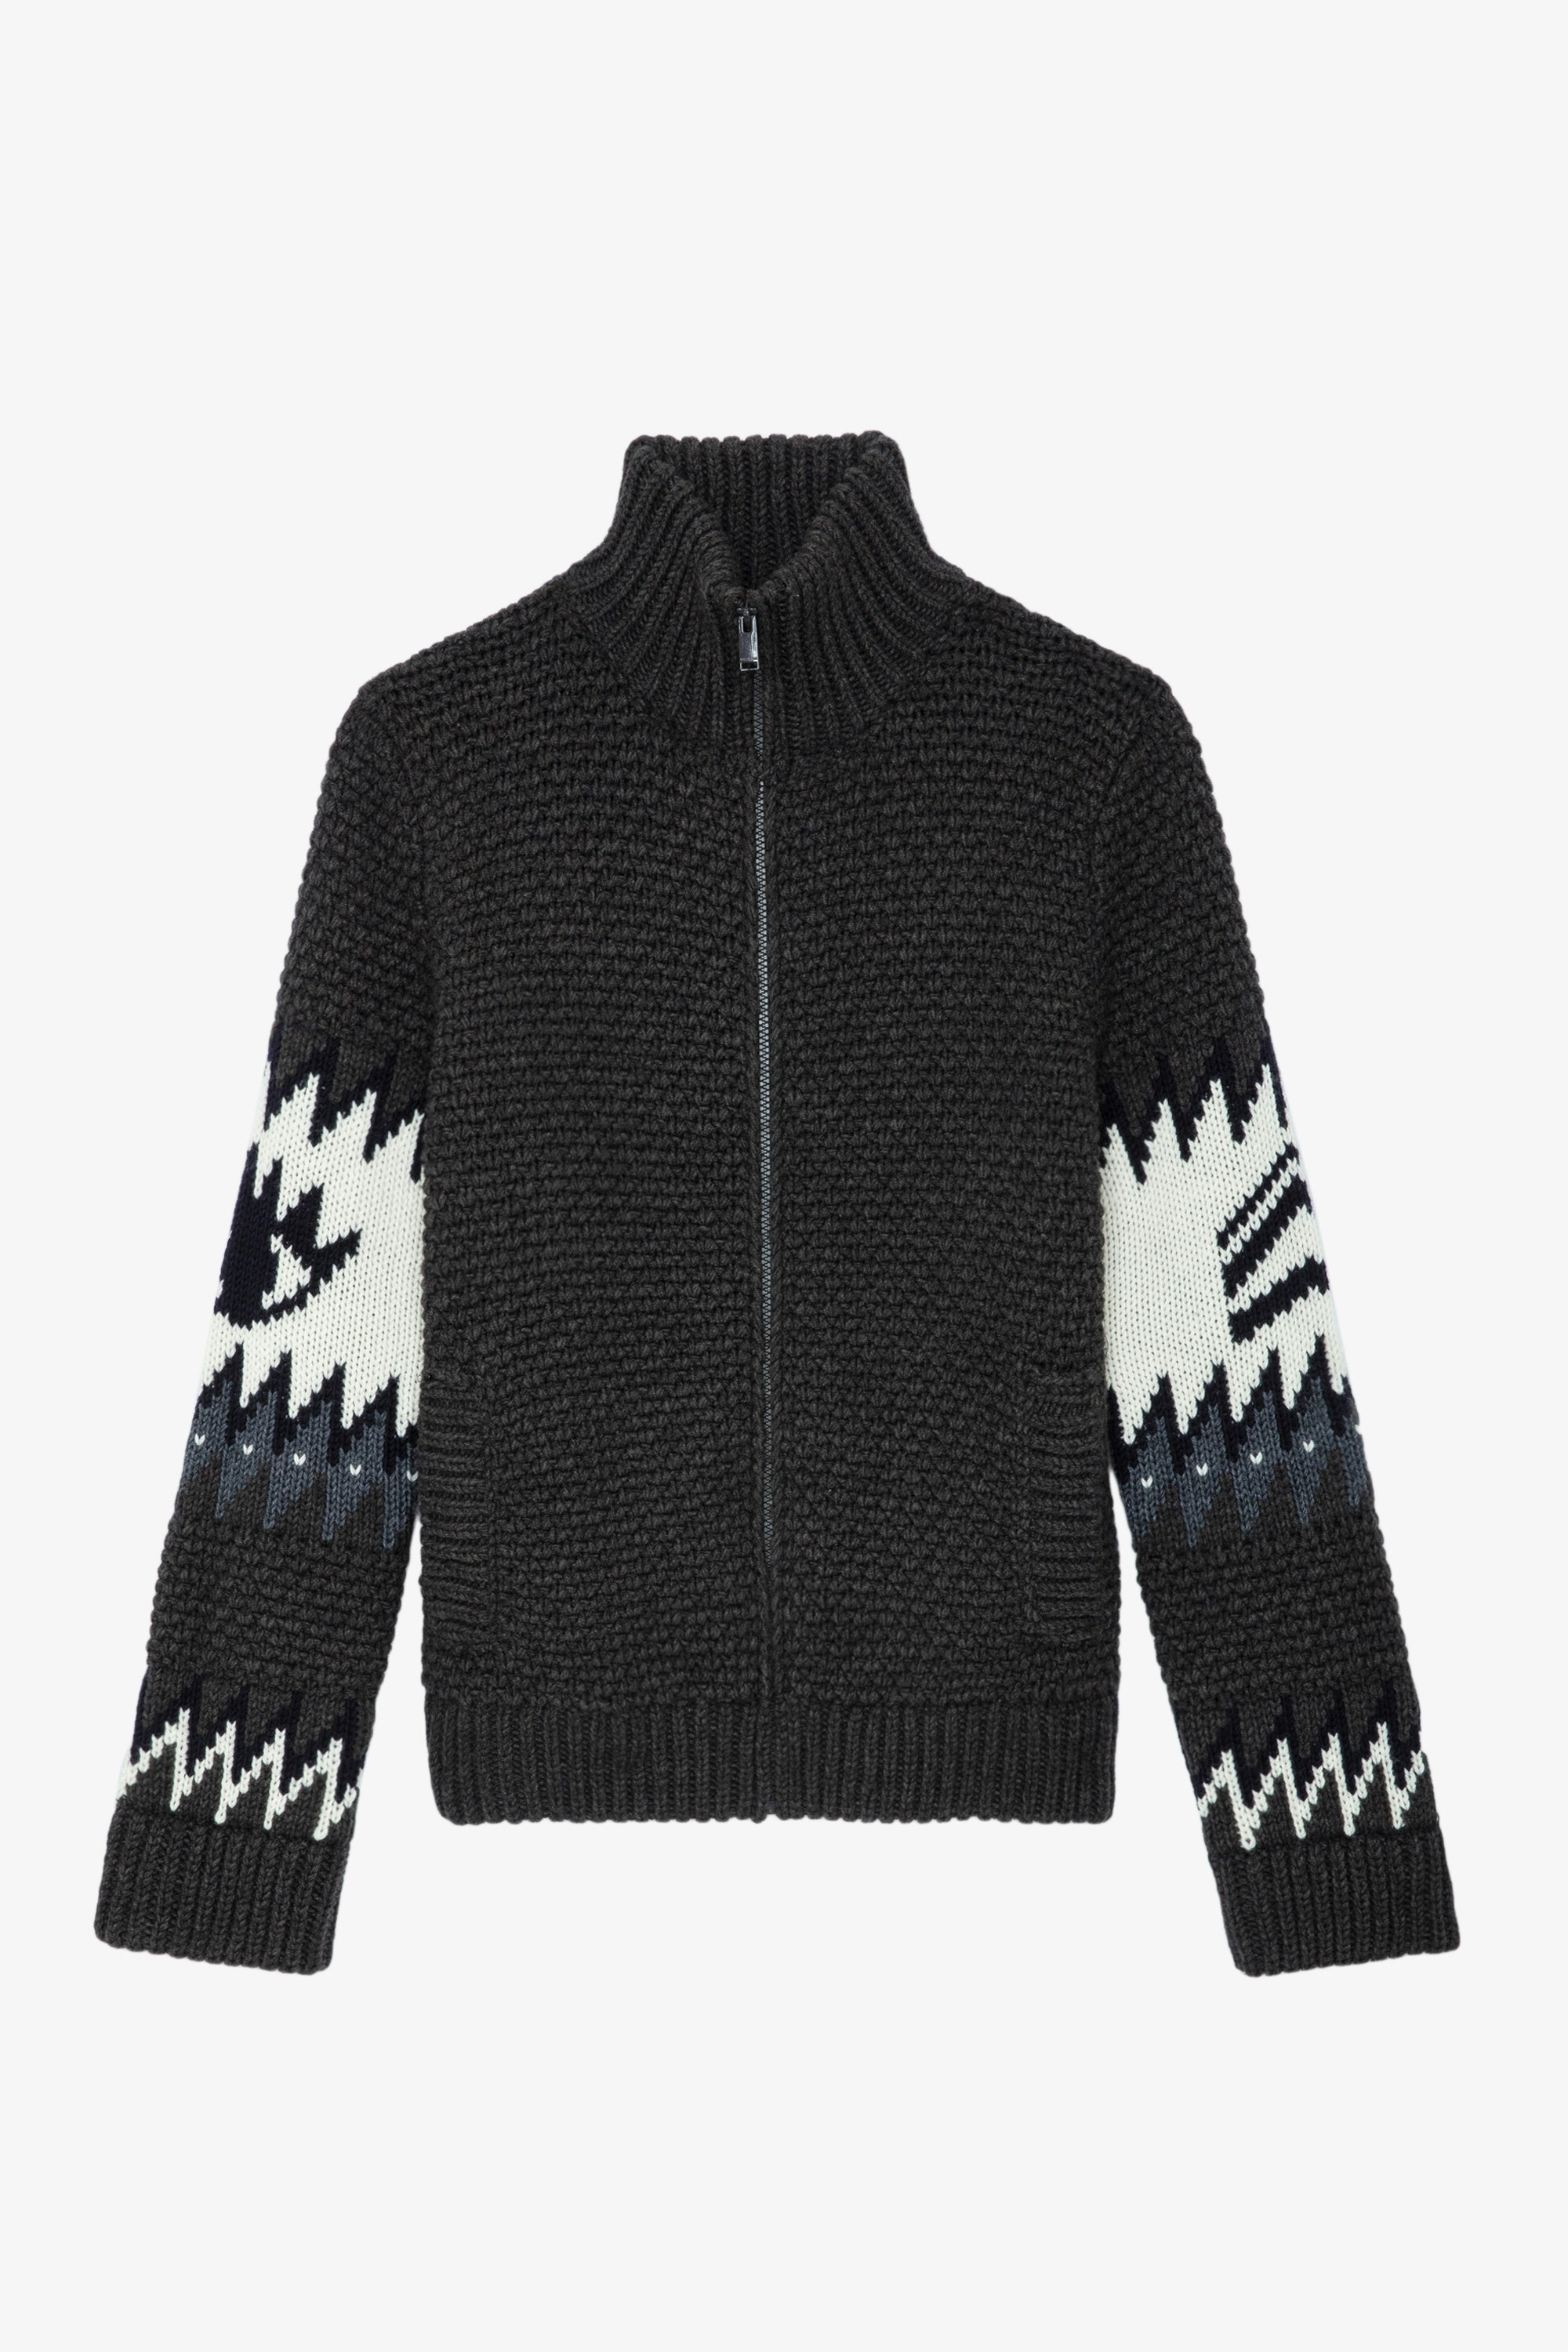 Christophe Cardigan - Anthracite knit long-sleeved cardigan with customised details by Humberto Cruz.